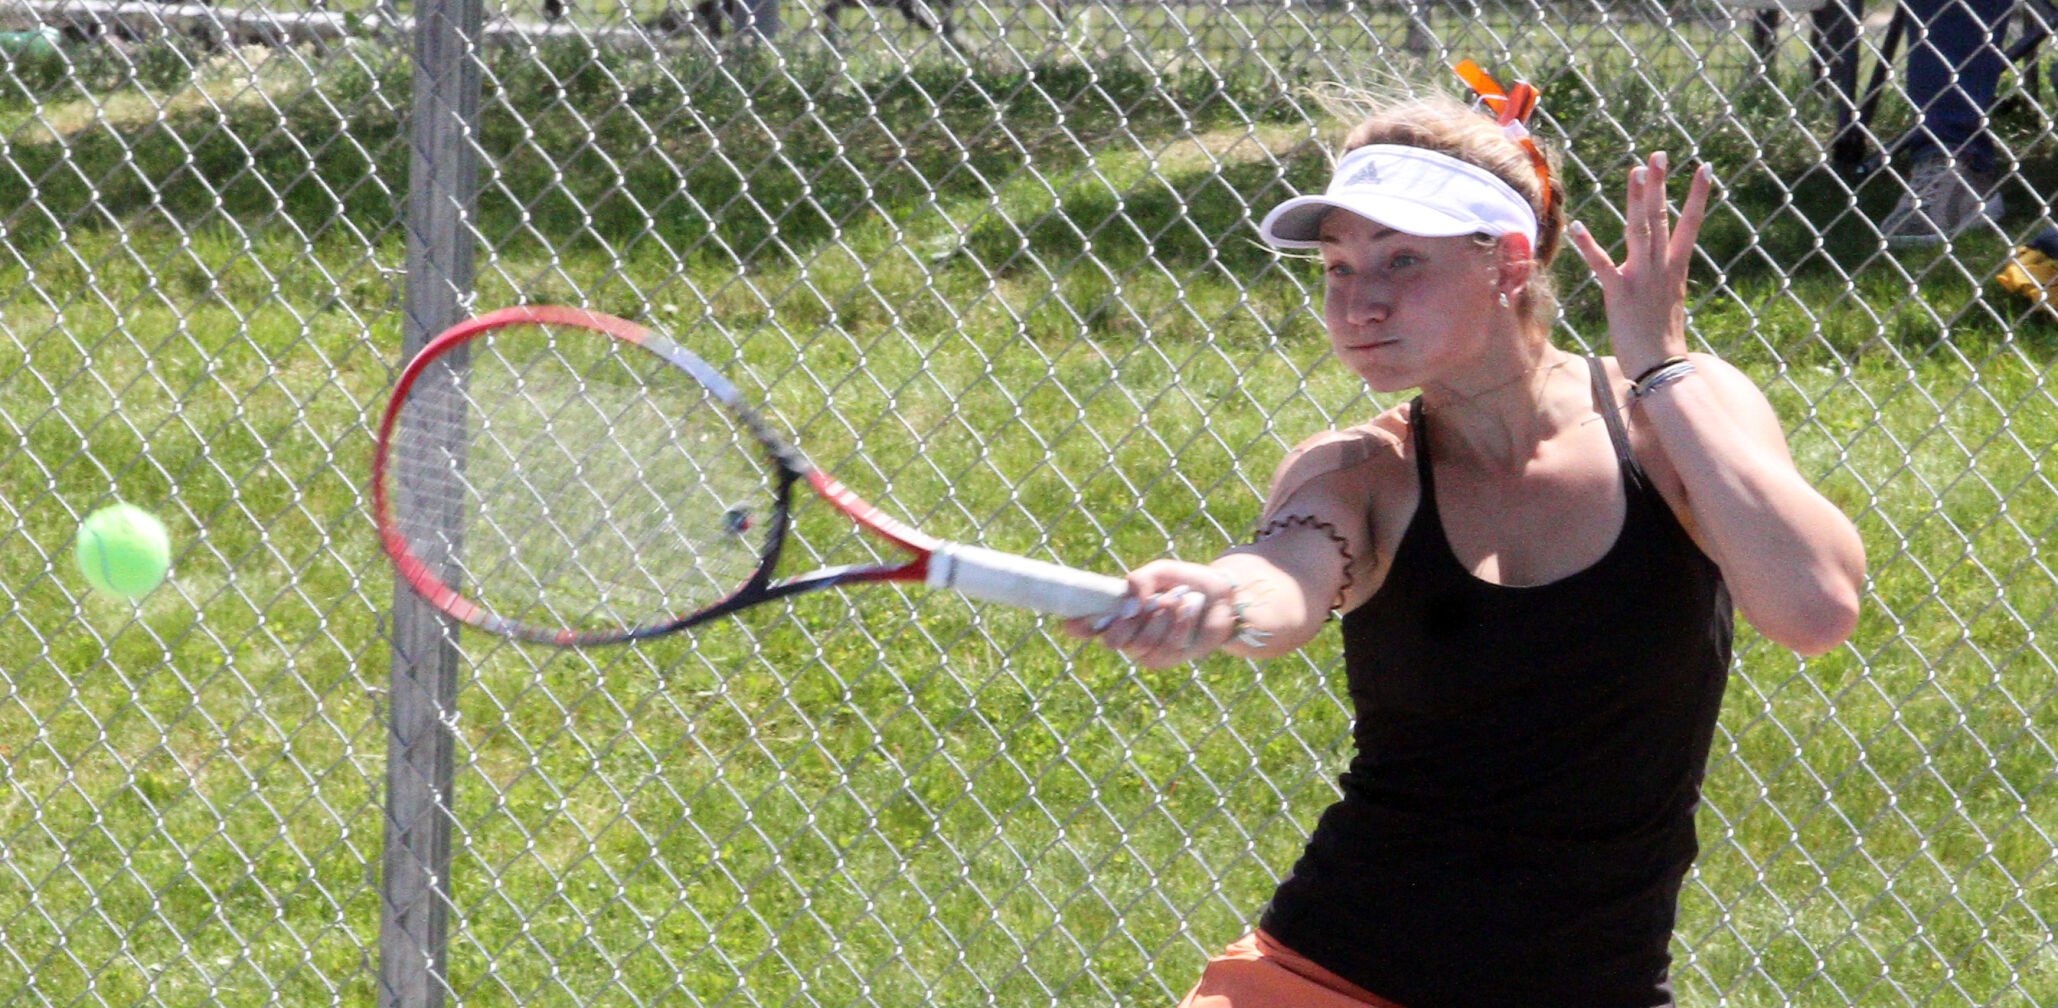 6th Consecutive LMC Tennis Crown Won by Traverse City St. Francis; Undefeated Johnstone Seeded No. 1 for State Finals